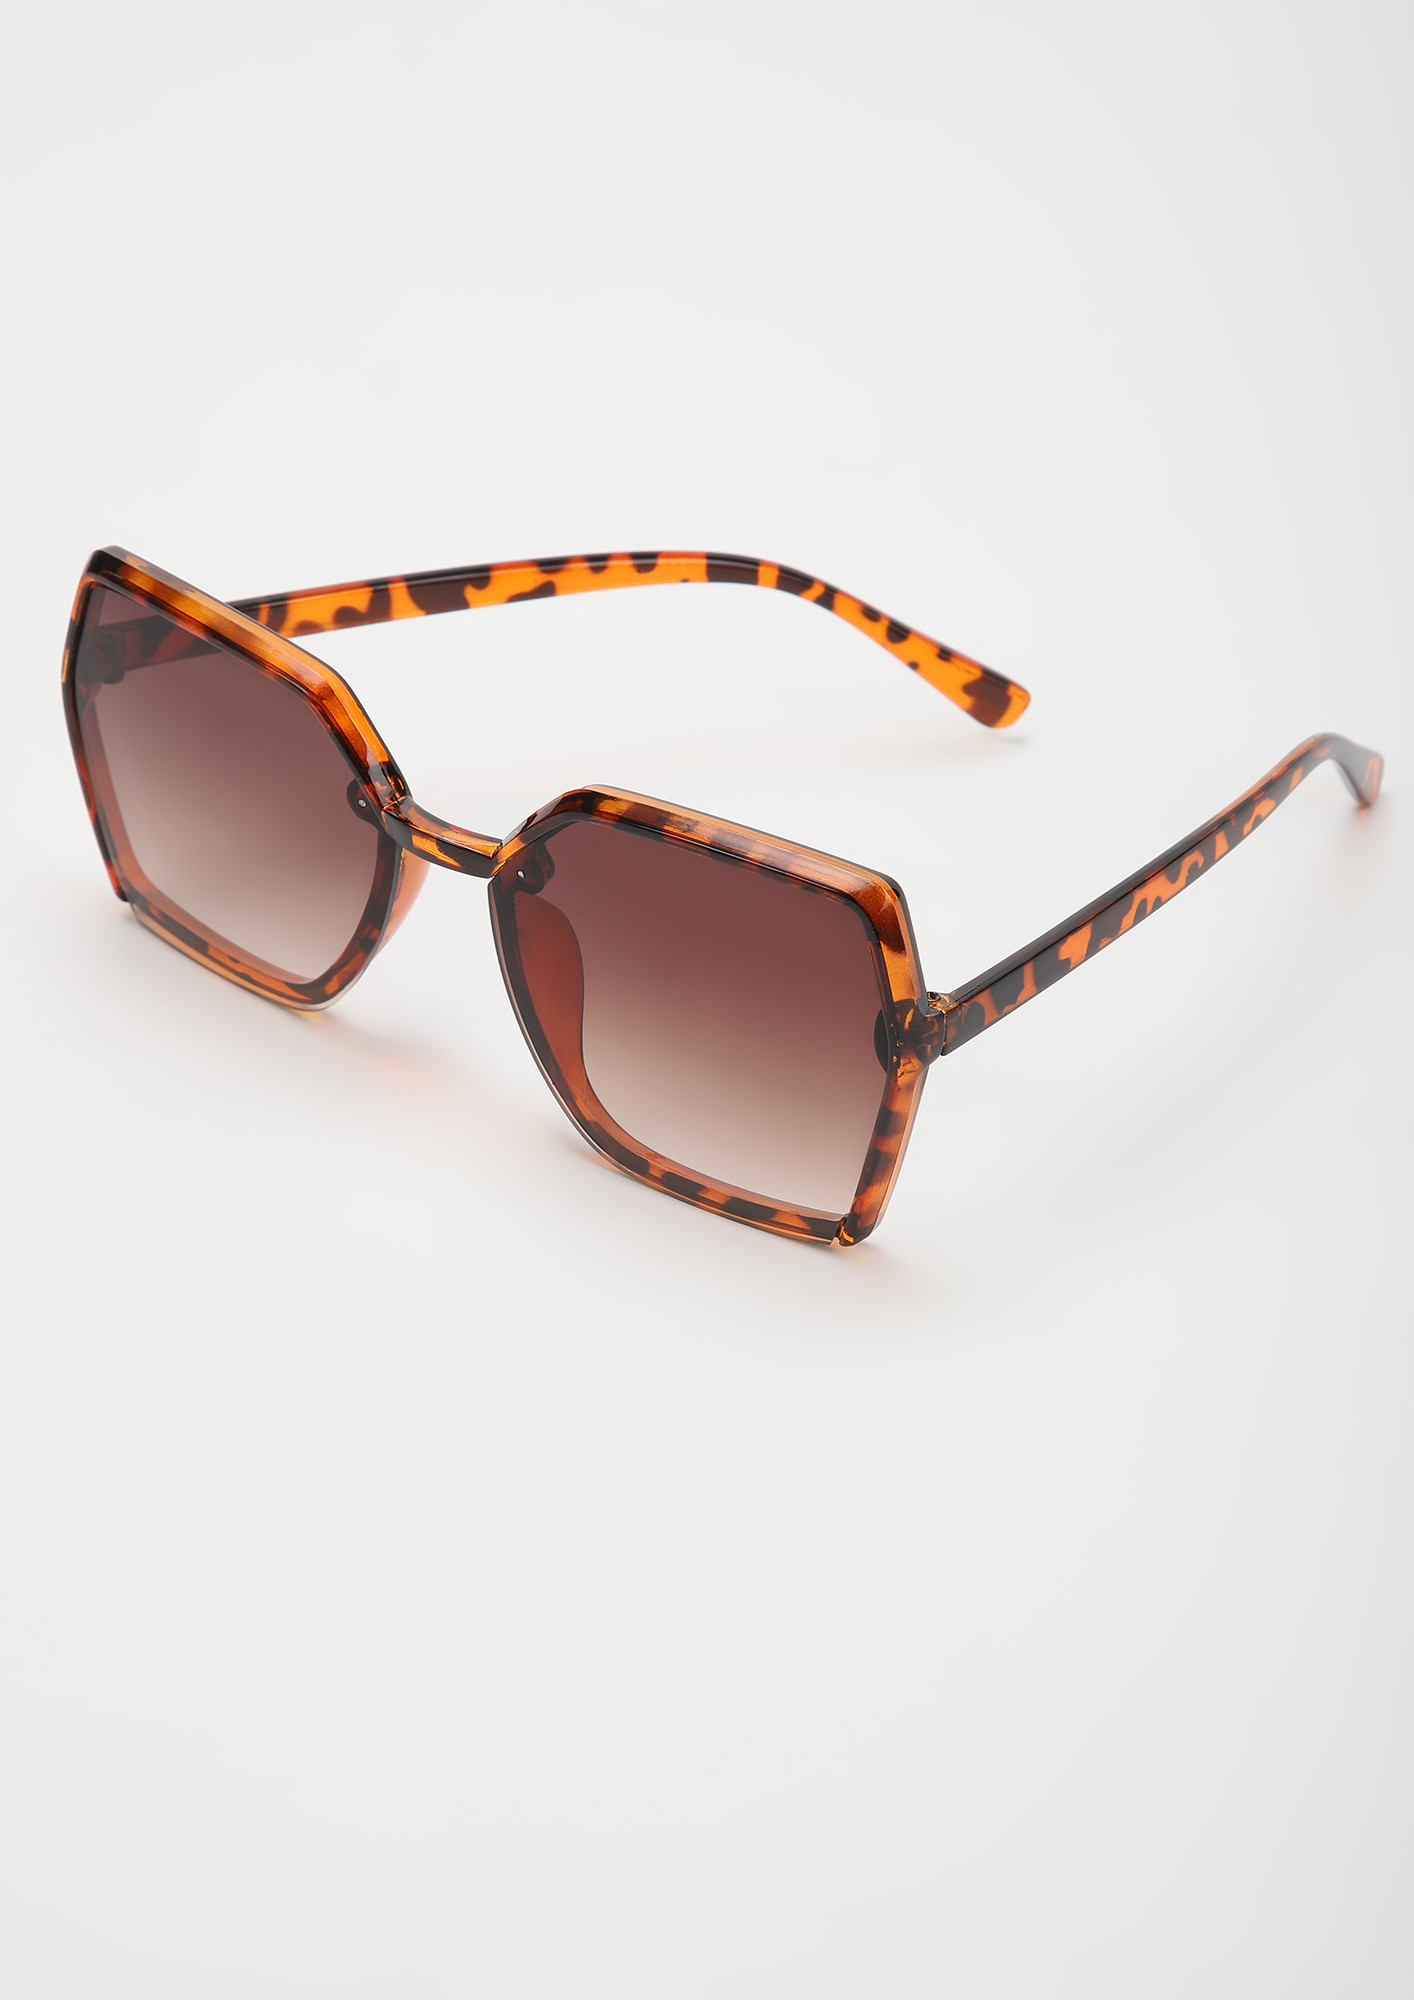 ON DUTY AMBER SQUARE FRAME SUNGLASSES